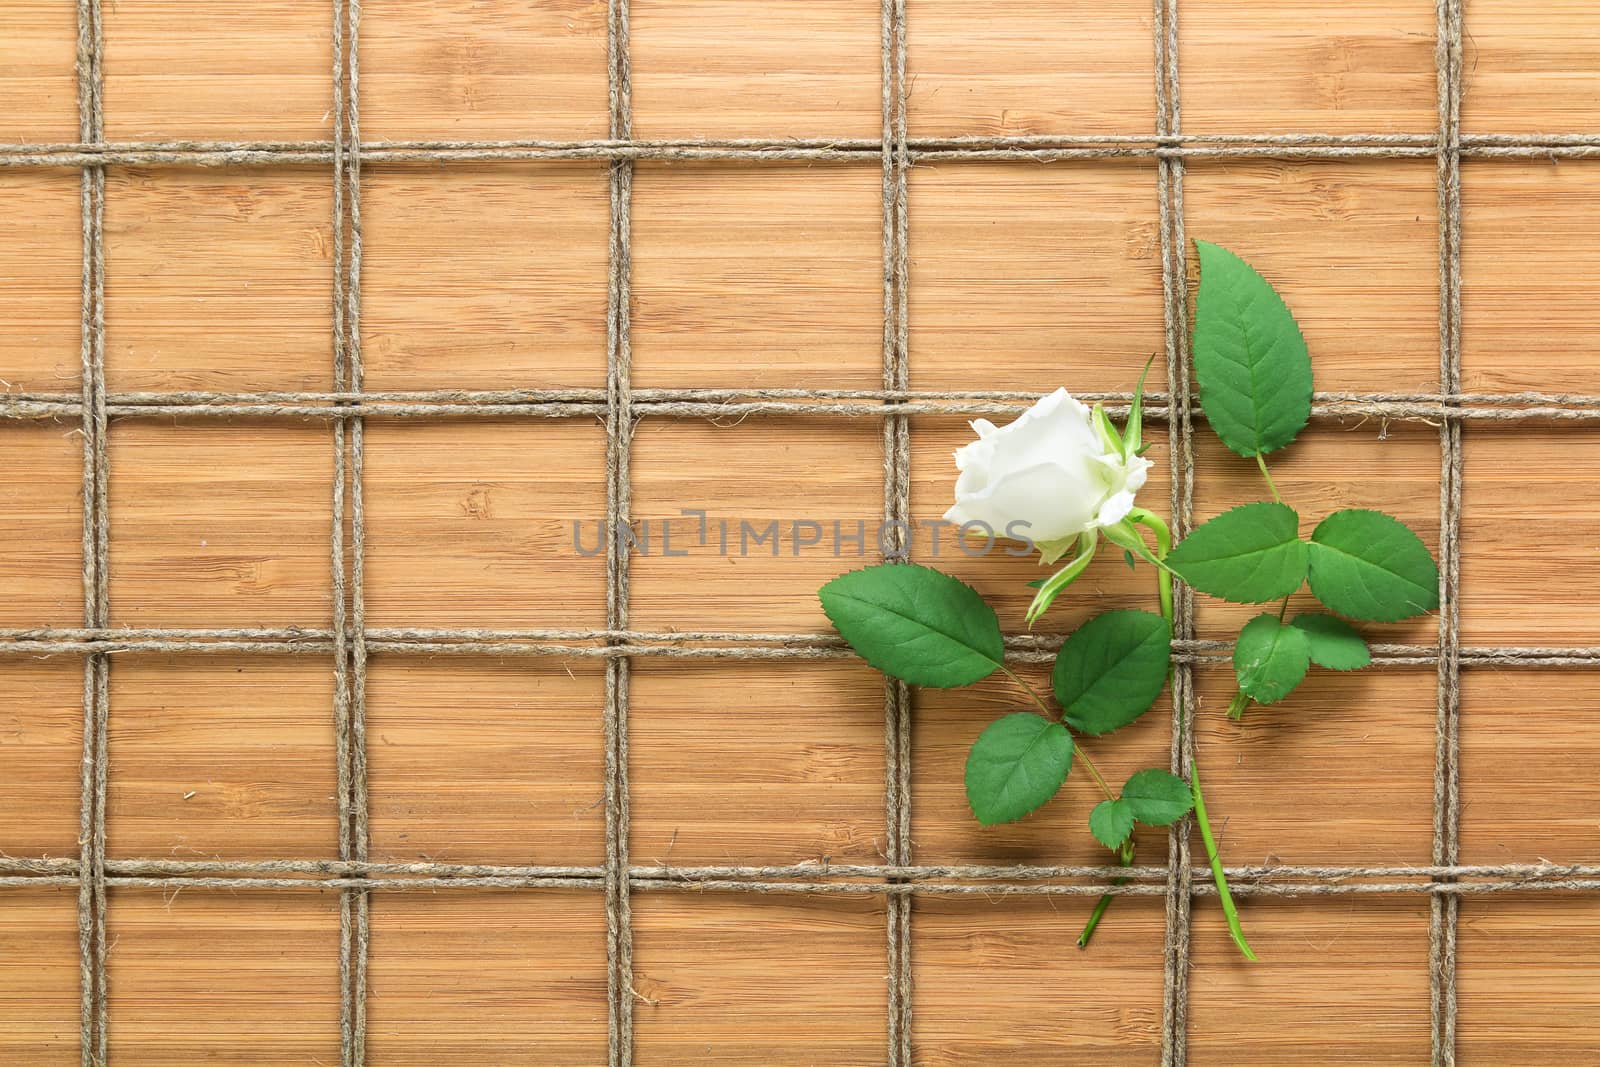 Square lined rope pattern on a wooden background and white rose with leaves interwoven between it. Texture for nature themes